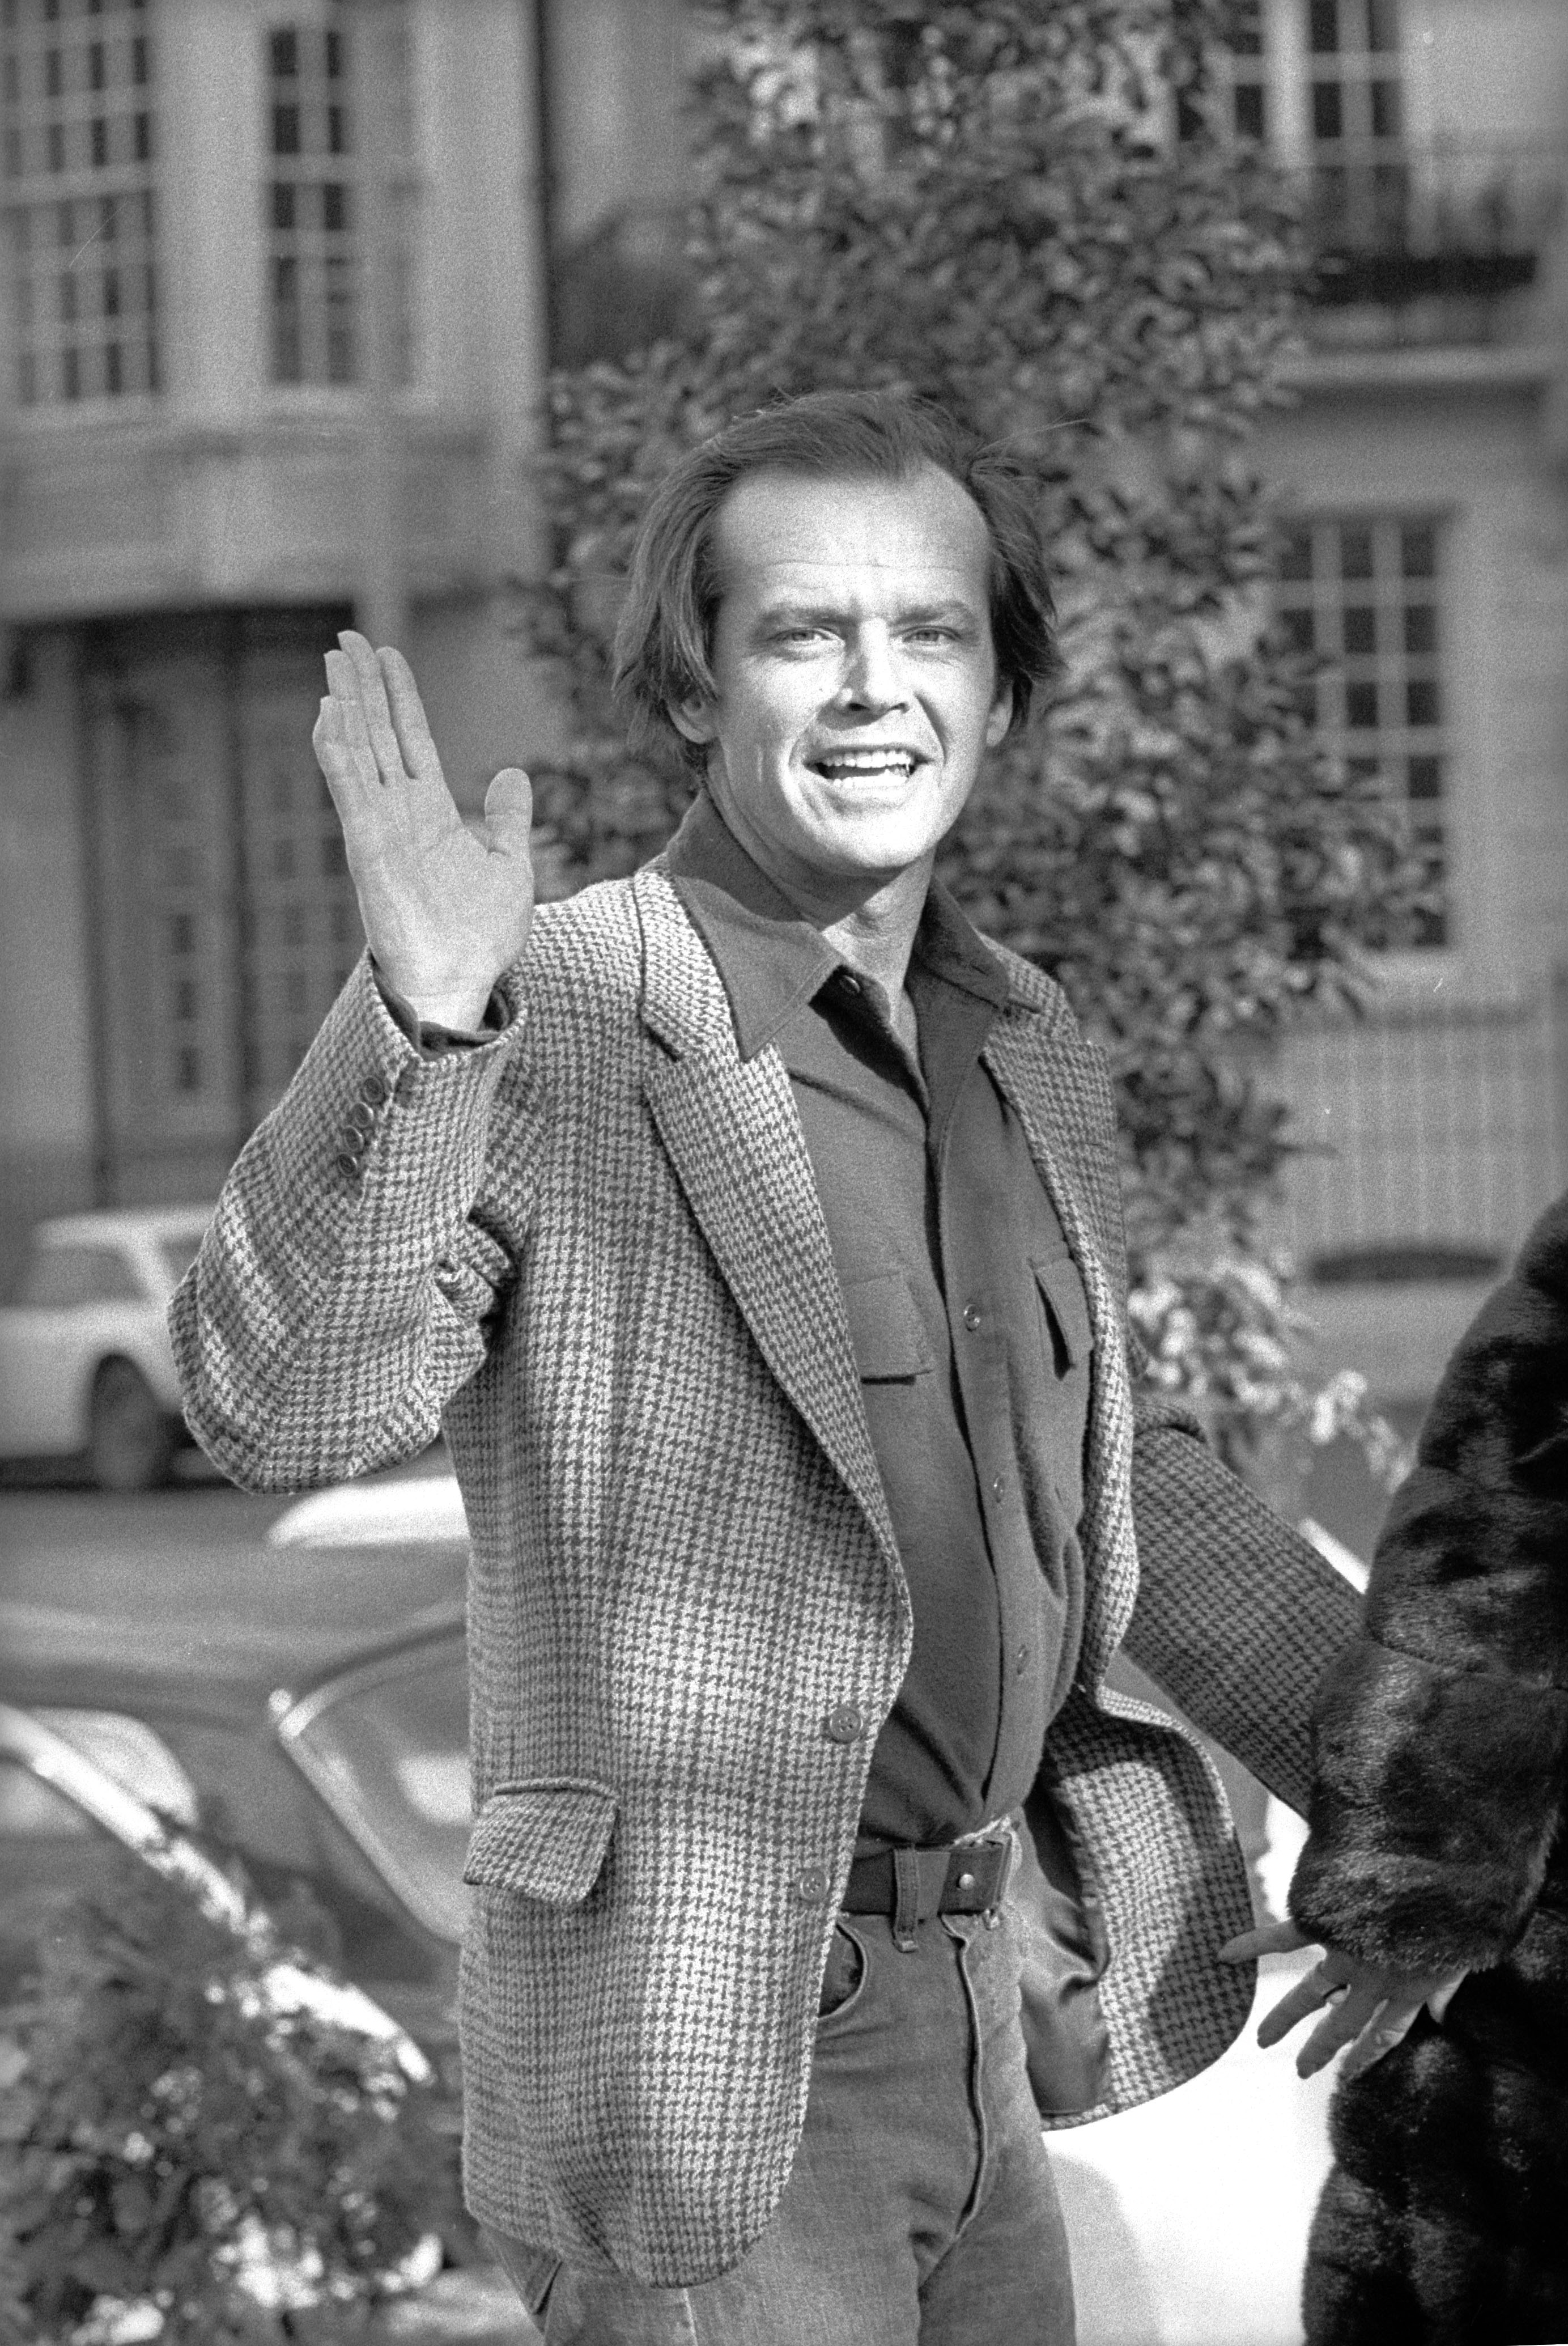 Jack Nicholson at the press conference for 'One Flew Over the Cuckoo's Nest', 9th February 1976 | Source: Getty Images